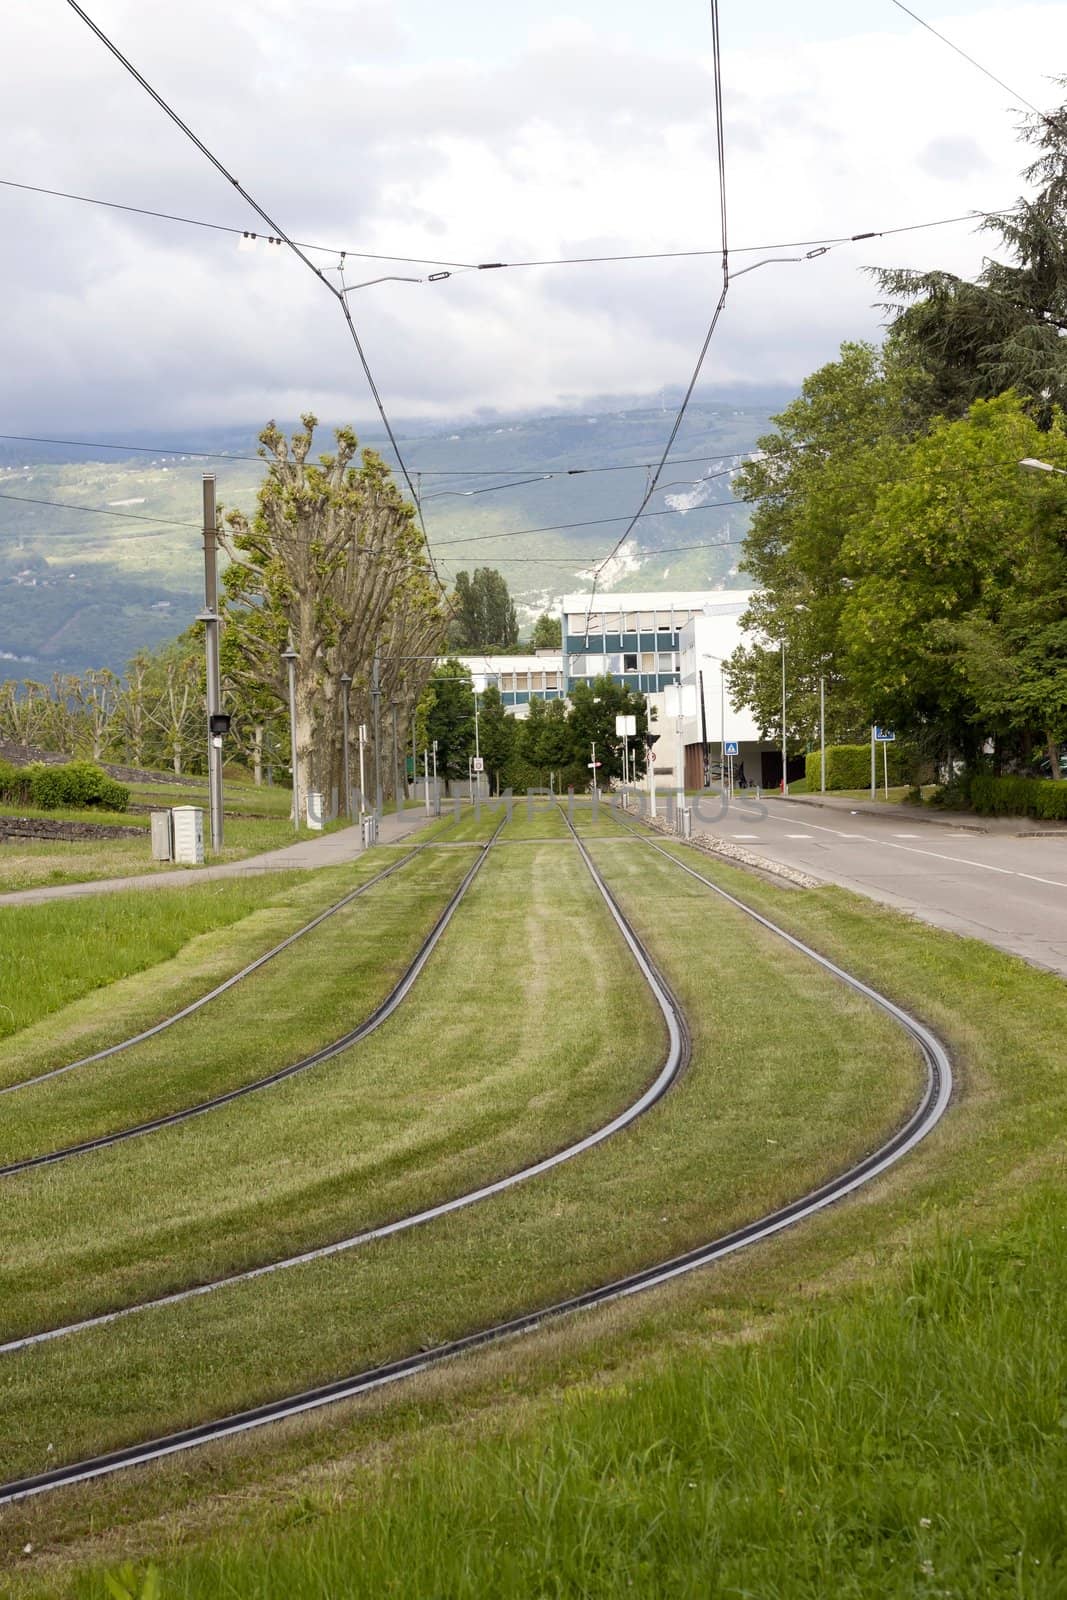 Grass Tram Way in Grenoble, France.